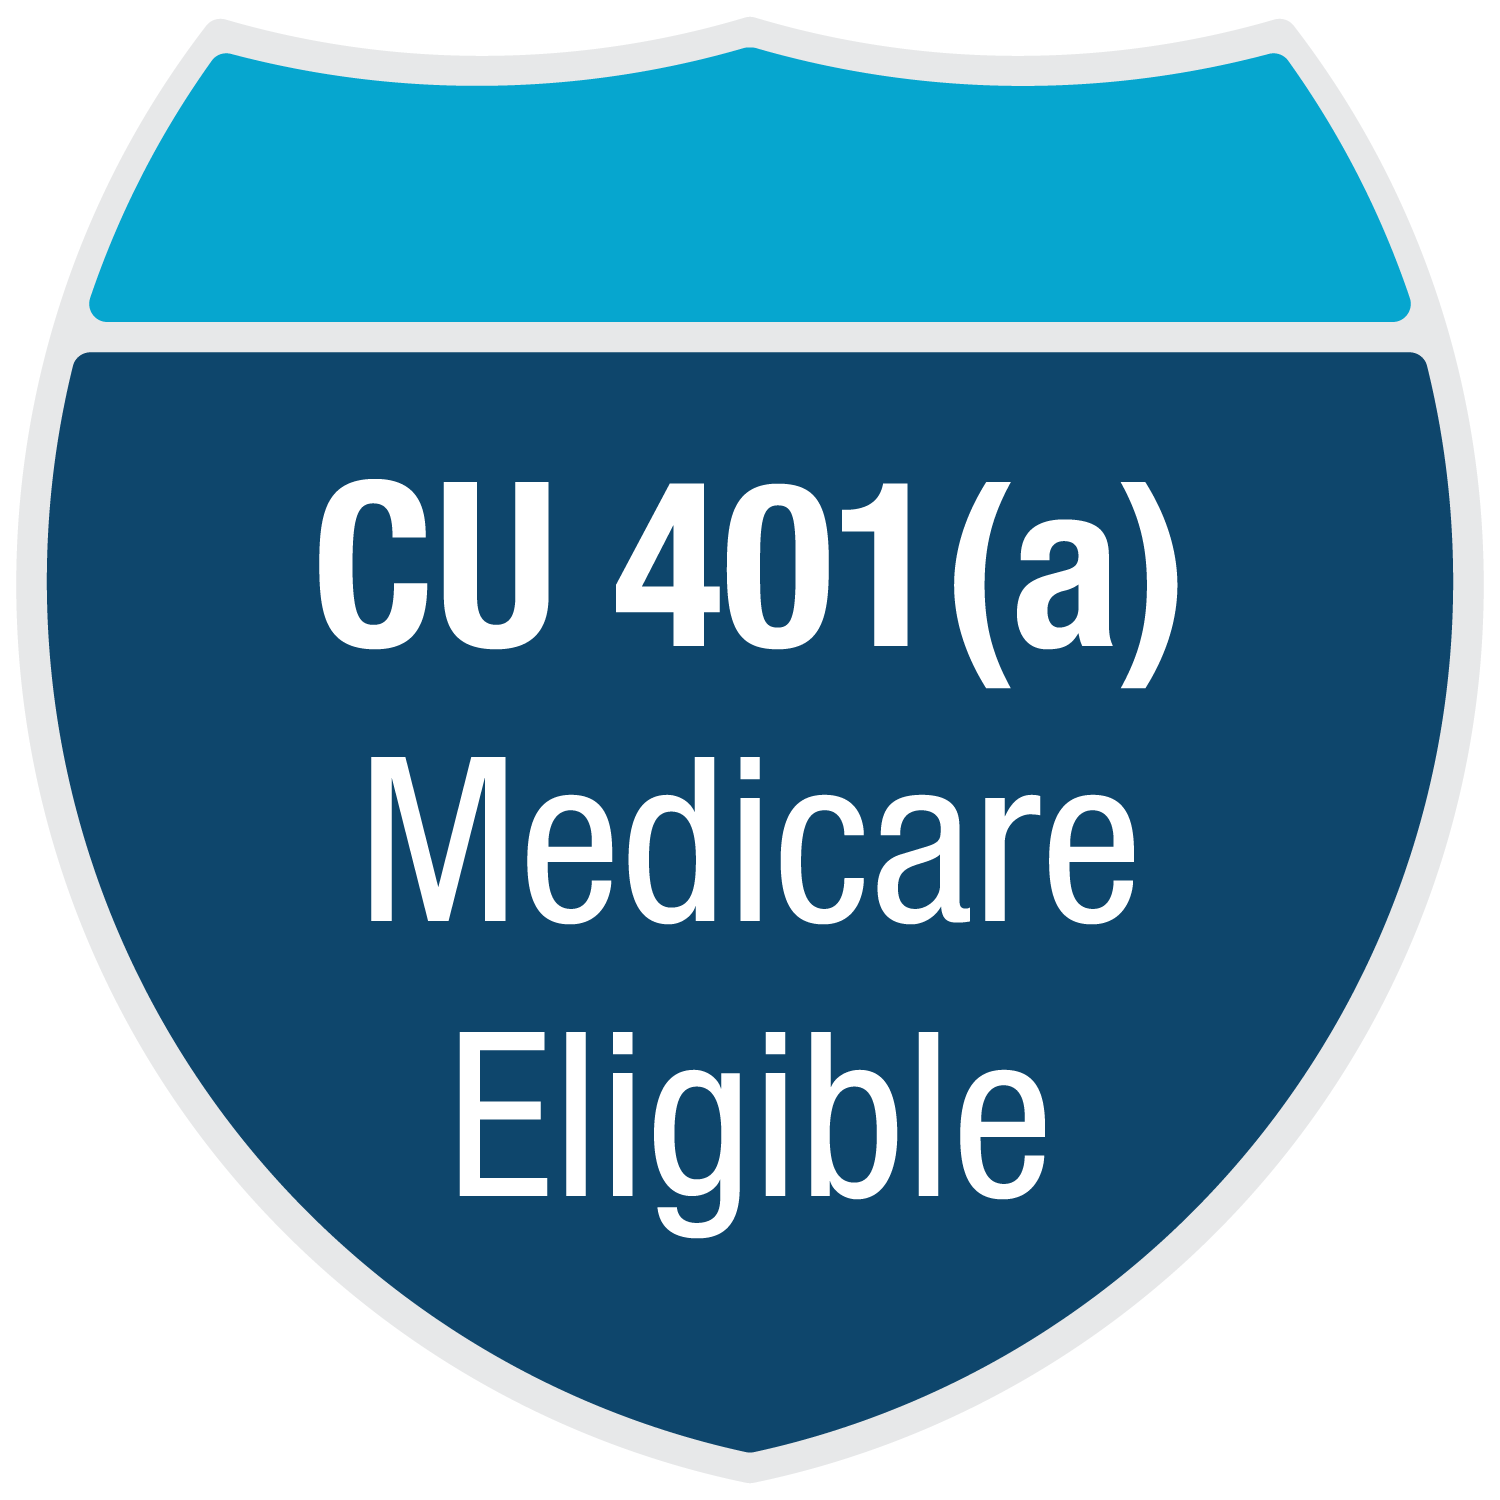 Click here if you are a 401(a) retiree who is Medicare eligible